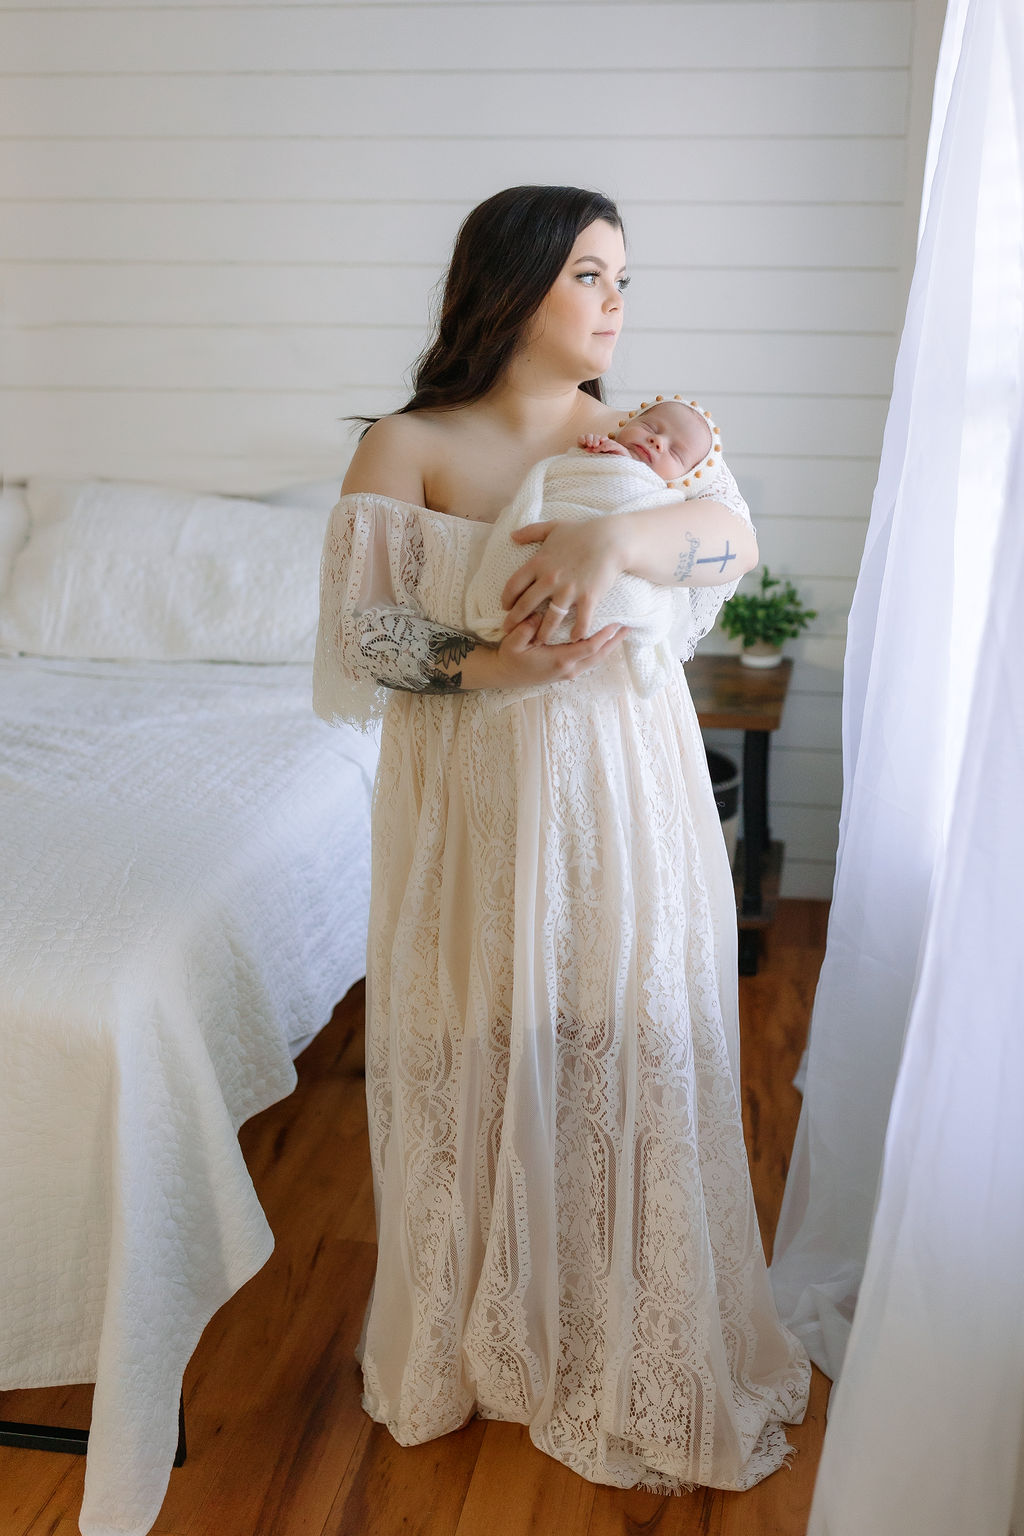 A new mom holds her sleeping newborn daughter in a white lace dress while looking out a window lactation consultant winchester va